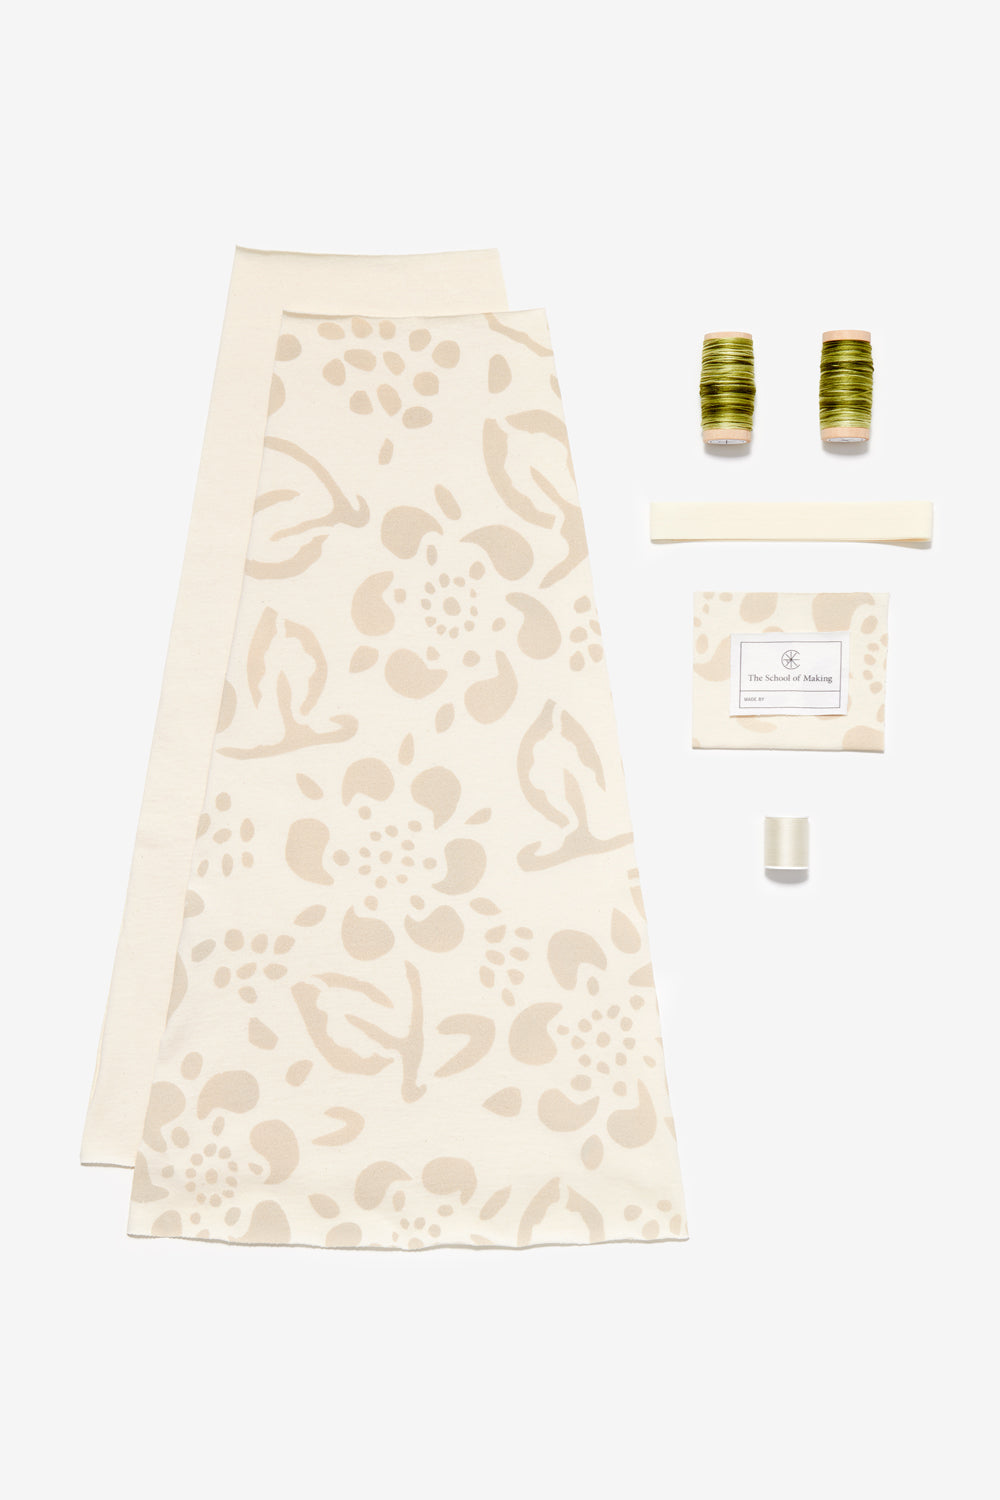 Kit contents of the Swing Skirt in Natural with Daisy stencil and green embroidery floss.